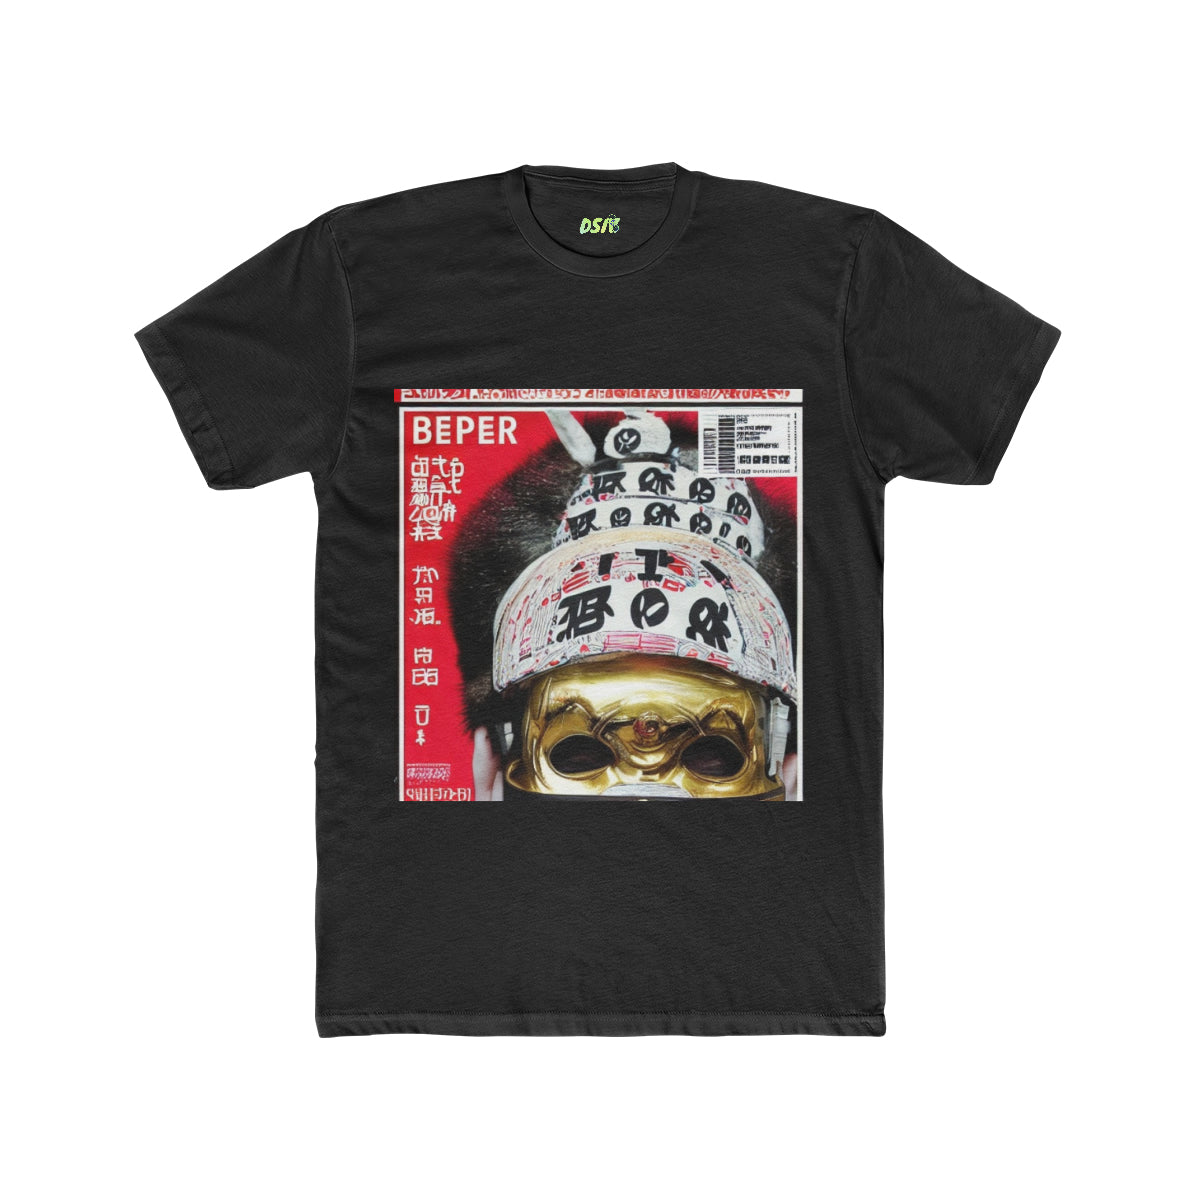 BEPER - Obey The Code T-Shirt Collection - DSIV